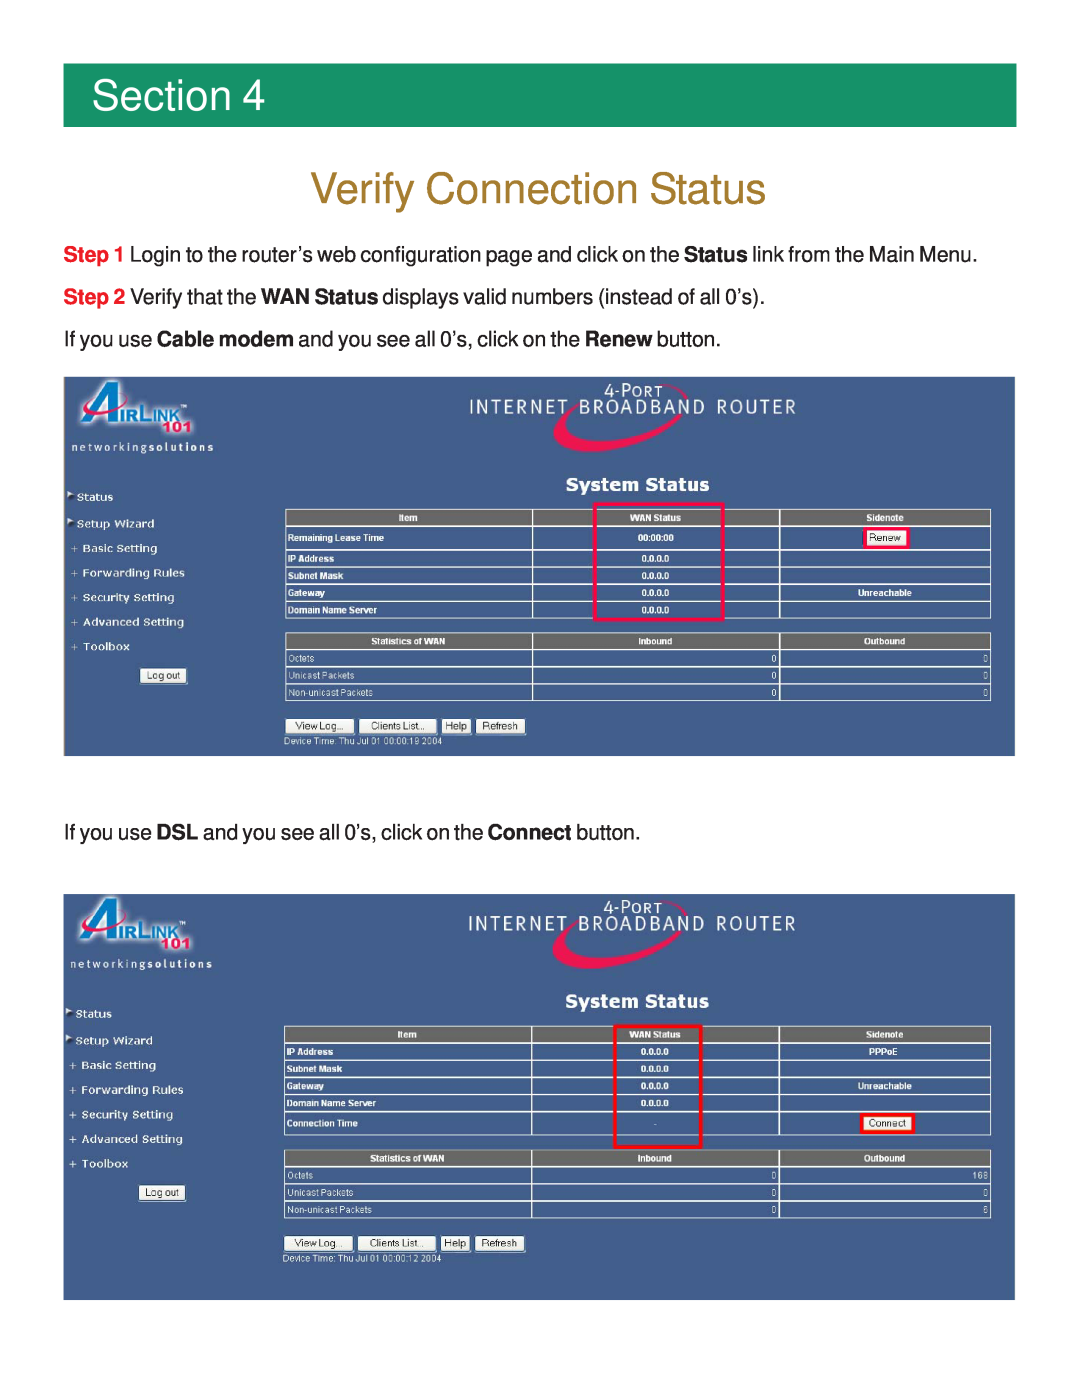 Airlink101 AR504 Verify Connection Status, Section, If you use Cable modem and you see all 0’s, click on the Renew button 